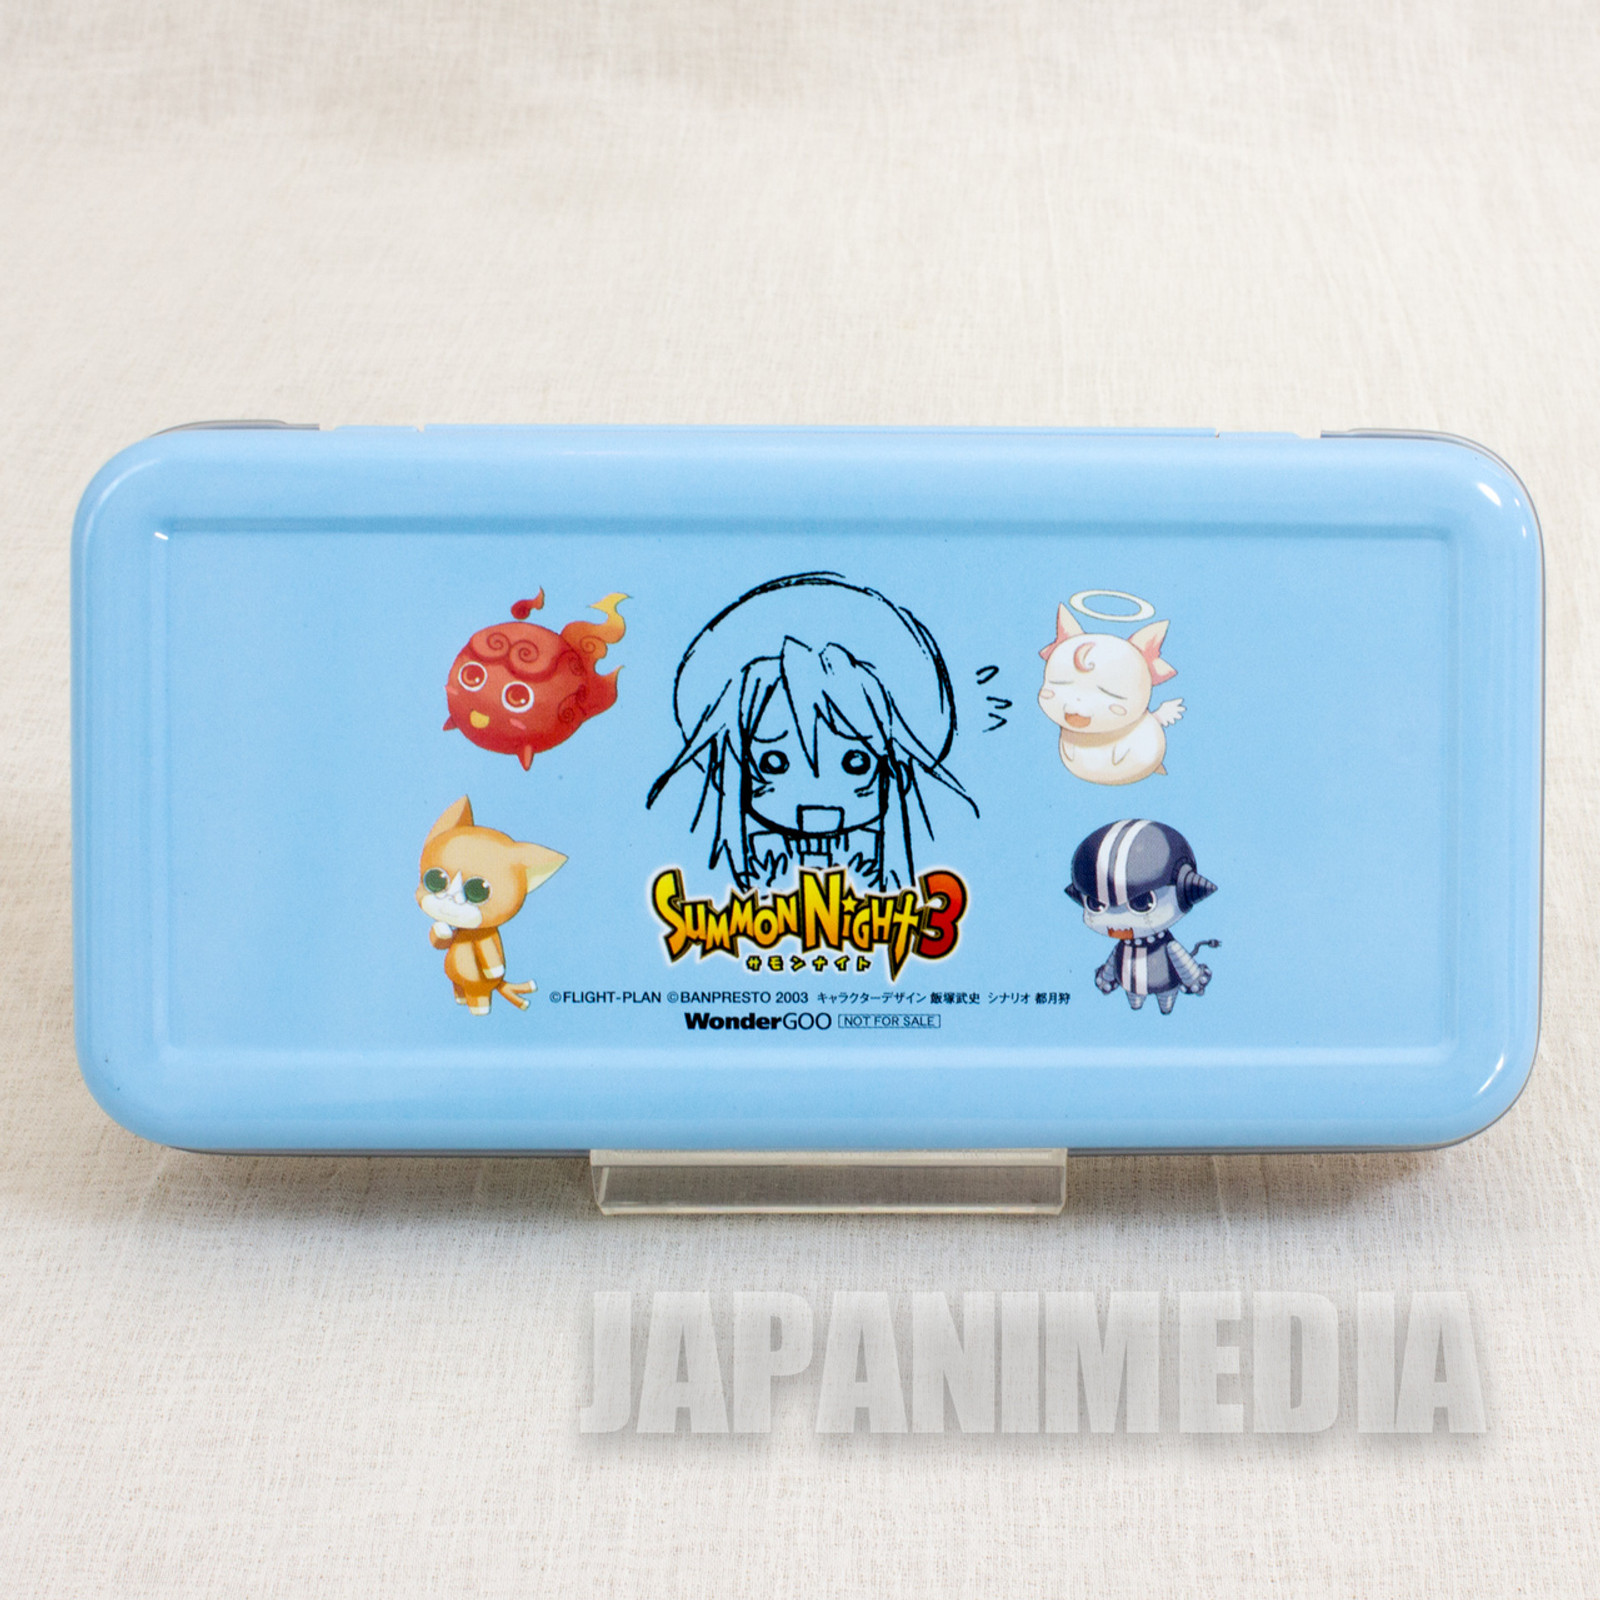 Summon Night 3 Can Pen Case [ Nup / Belfraw / Alieze / Will ] PS2 JAPAN GAME